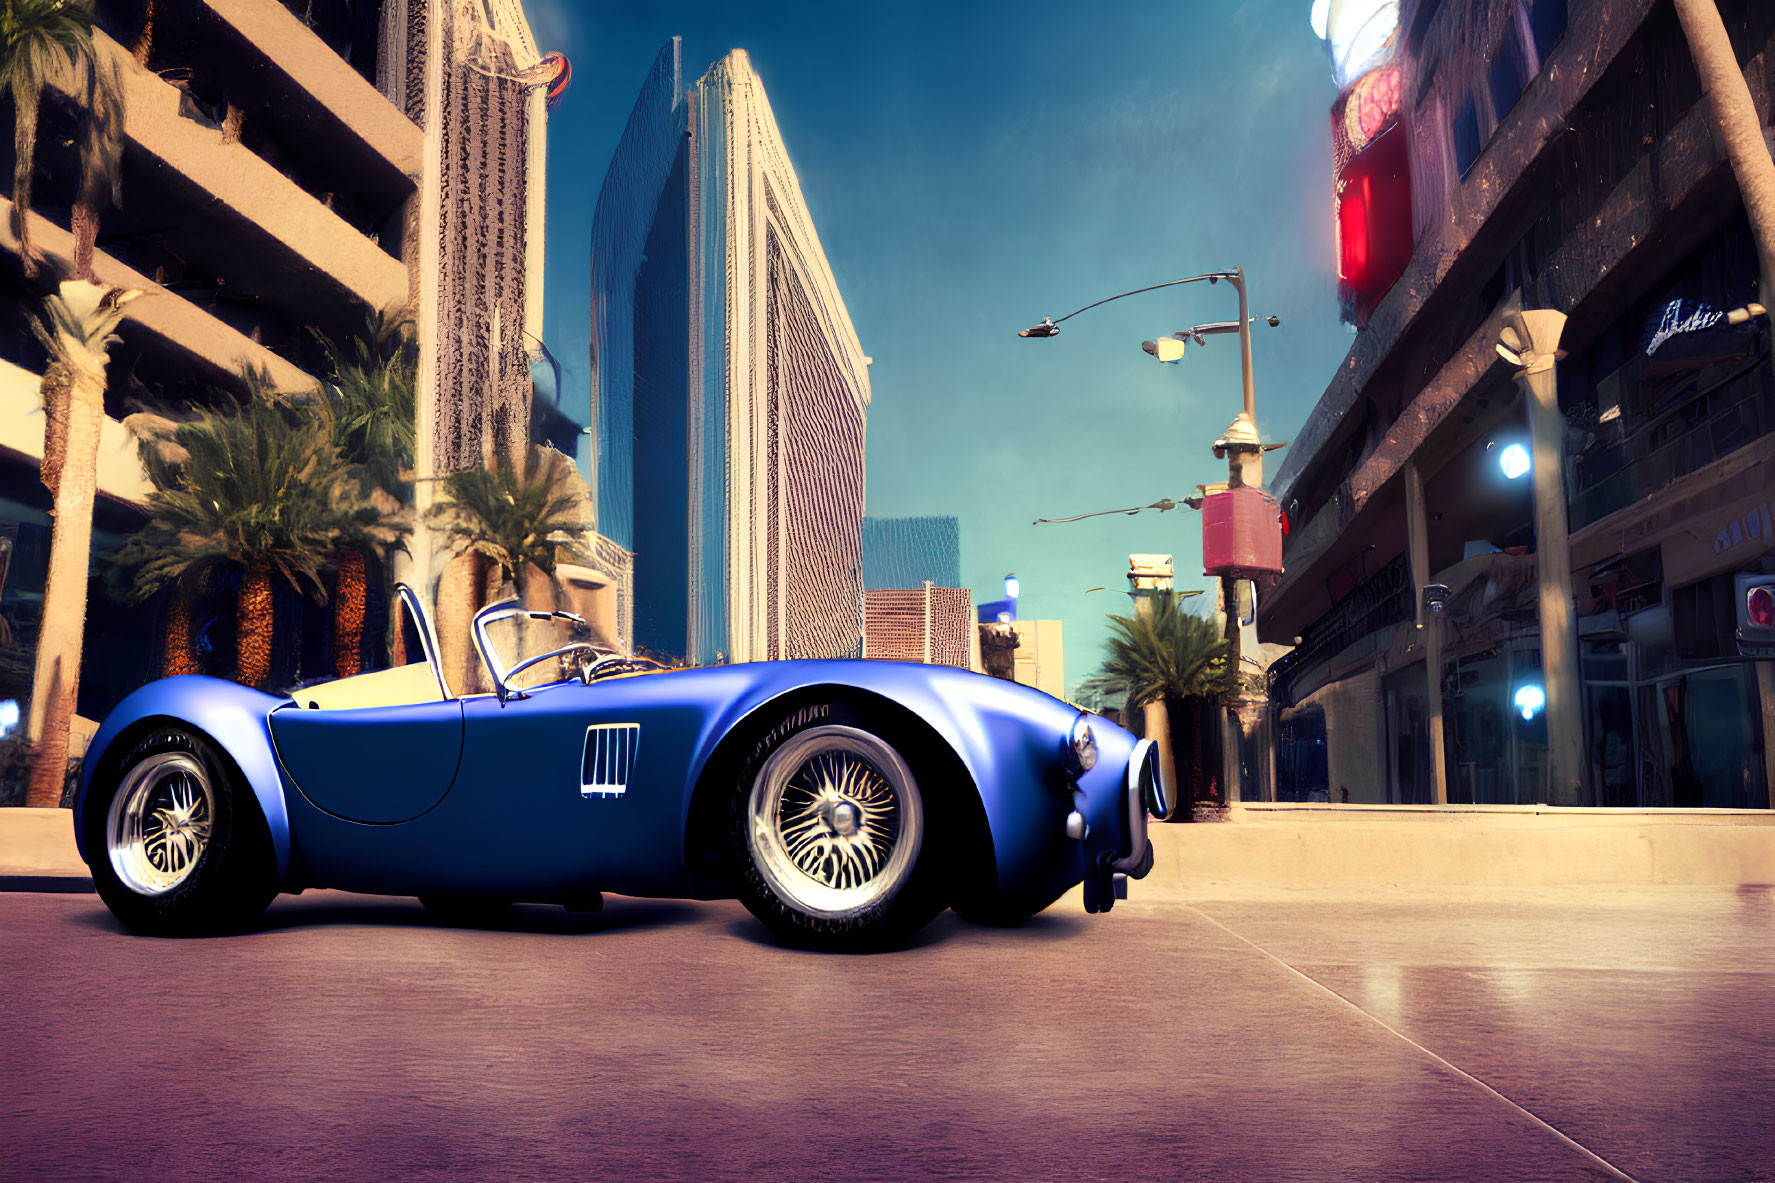 Blue Convertible Sports Car on Sunny Street with Skyscrapers and Palm Trees